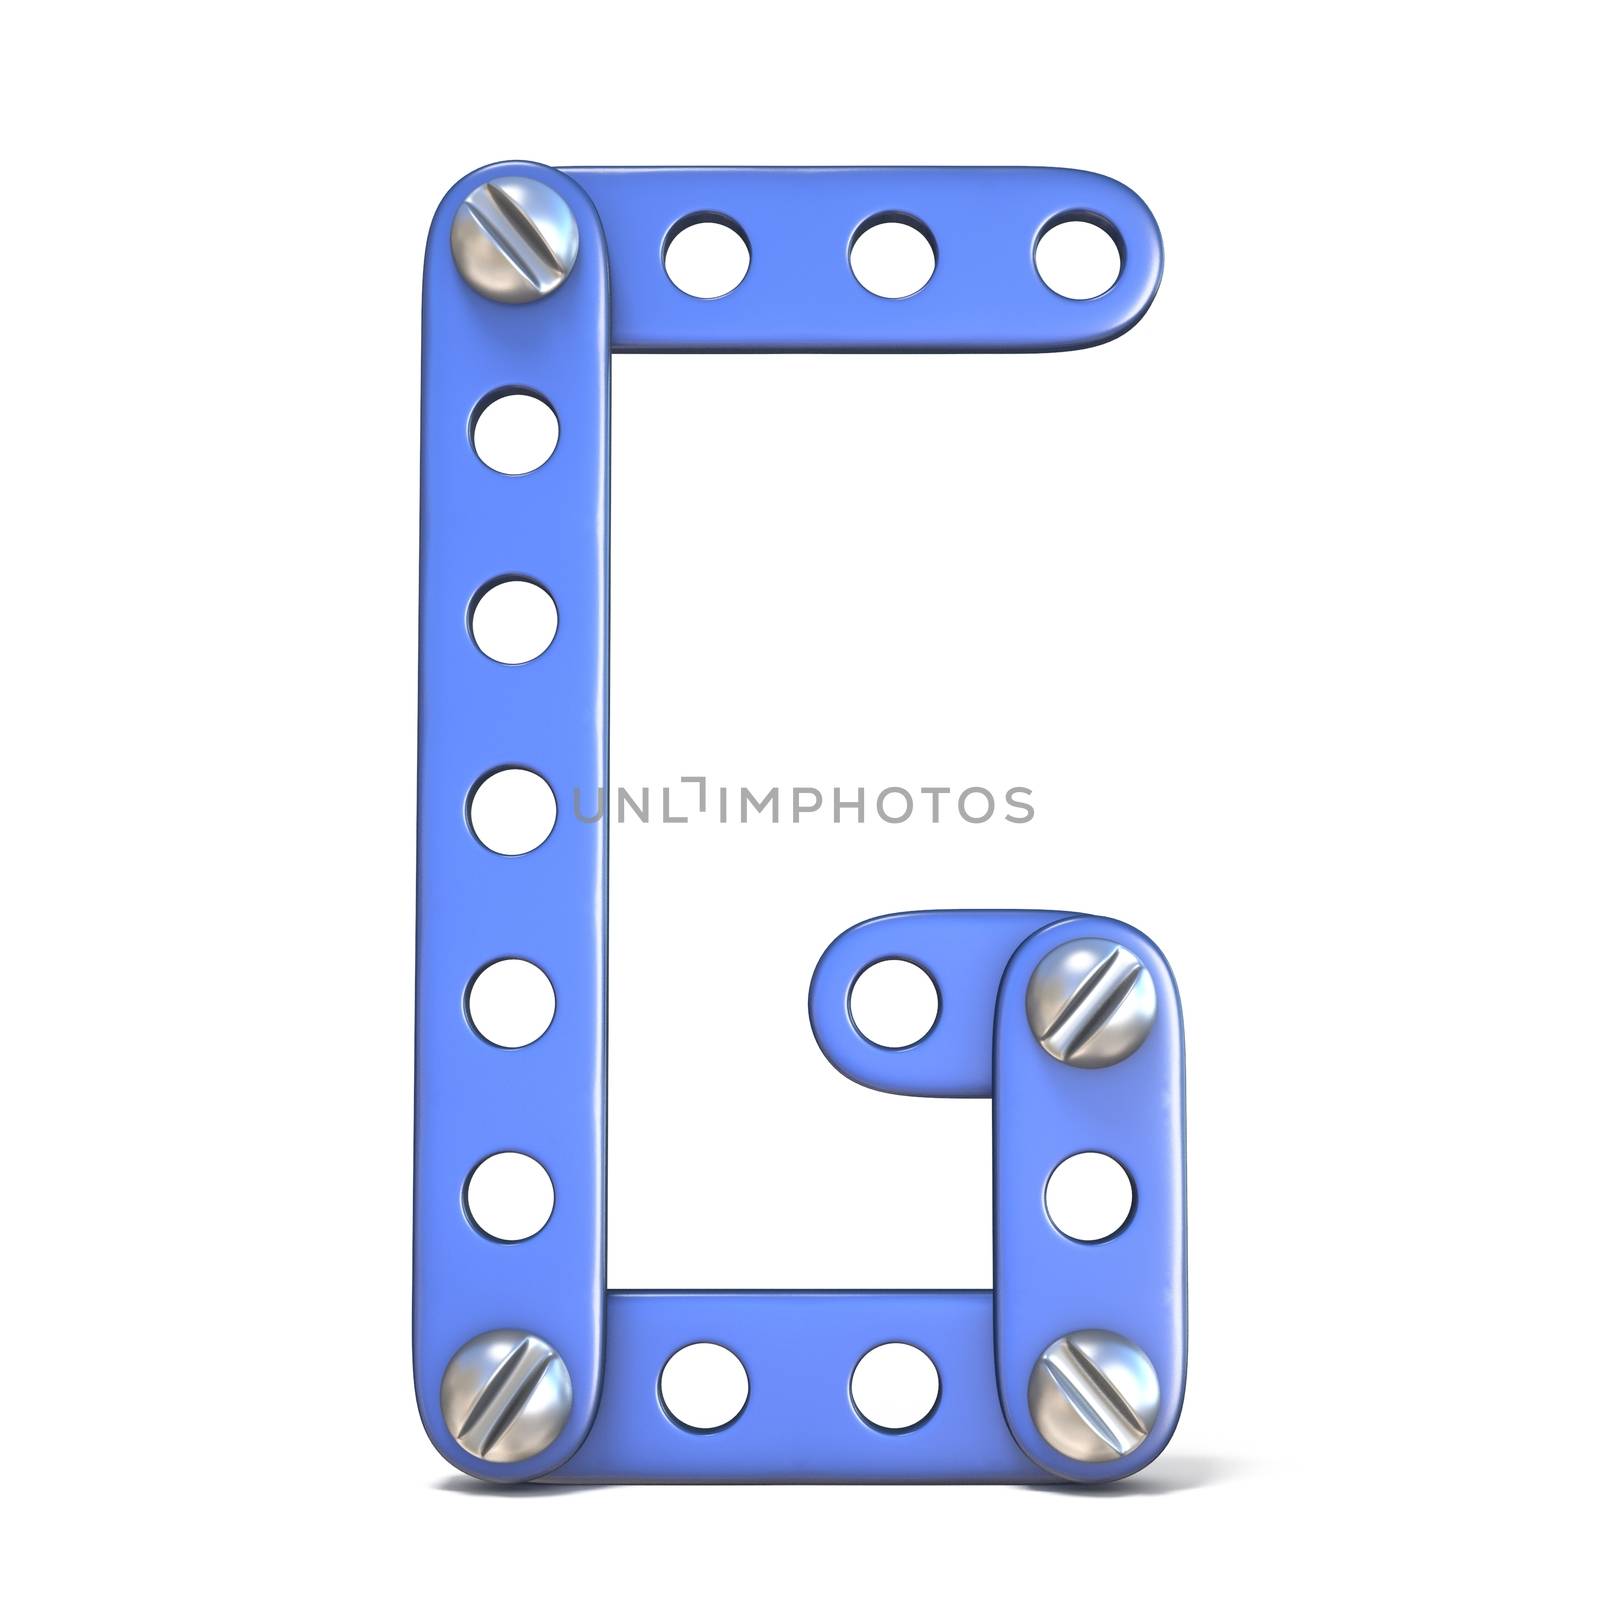 Alphabet made of blue metal constructor toy Letter G 3D render illustration isolated on white background